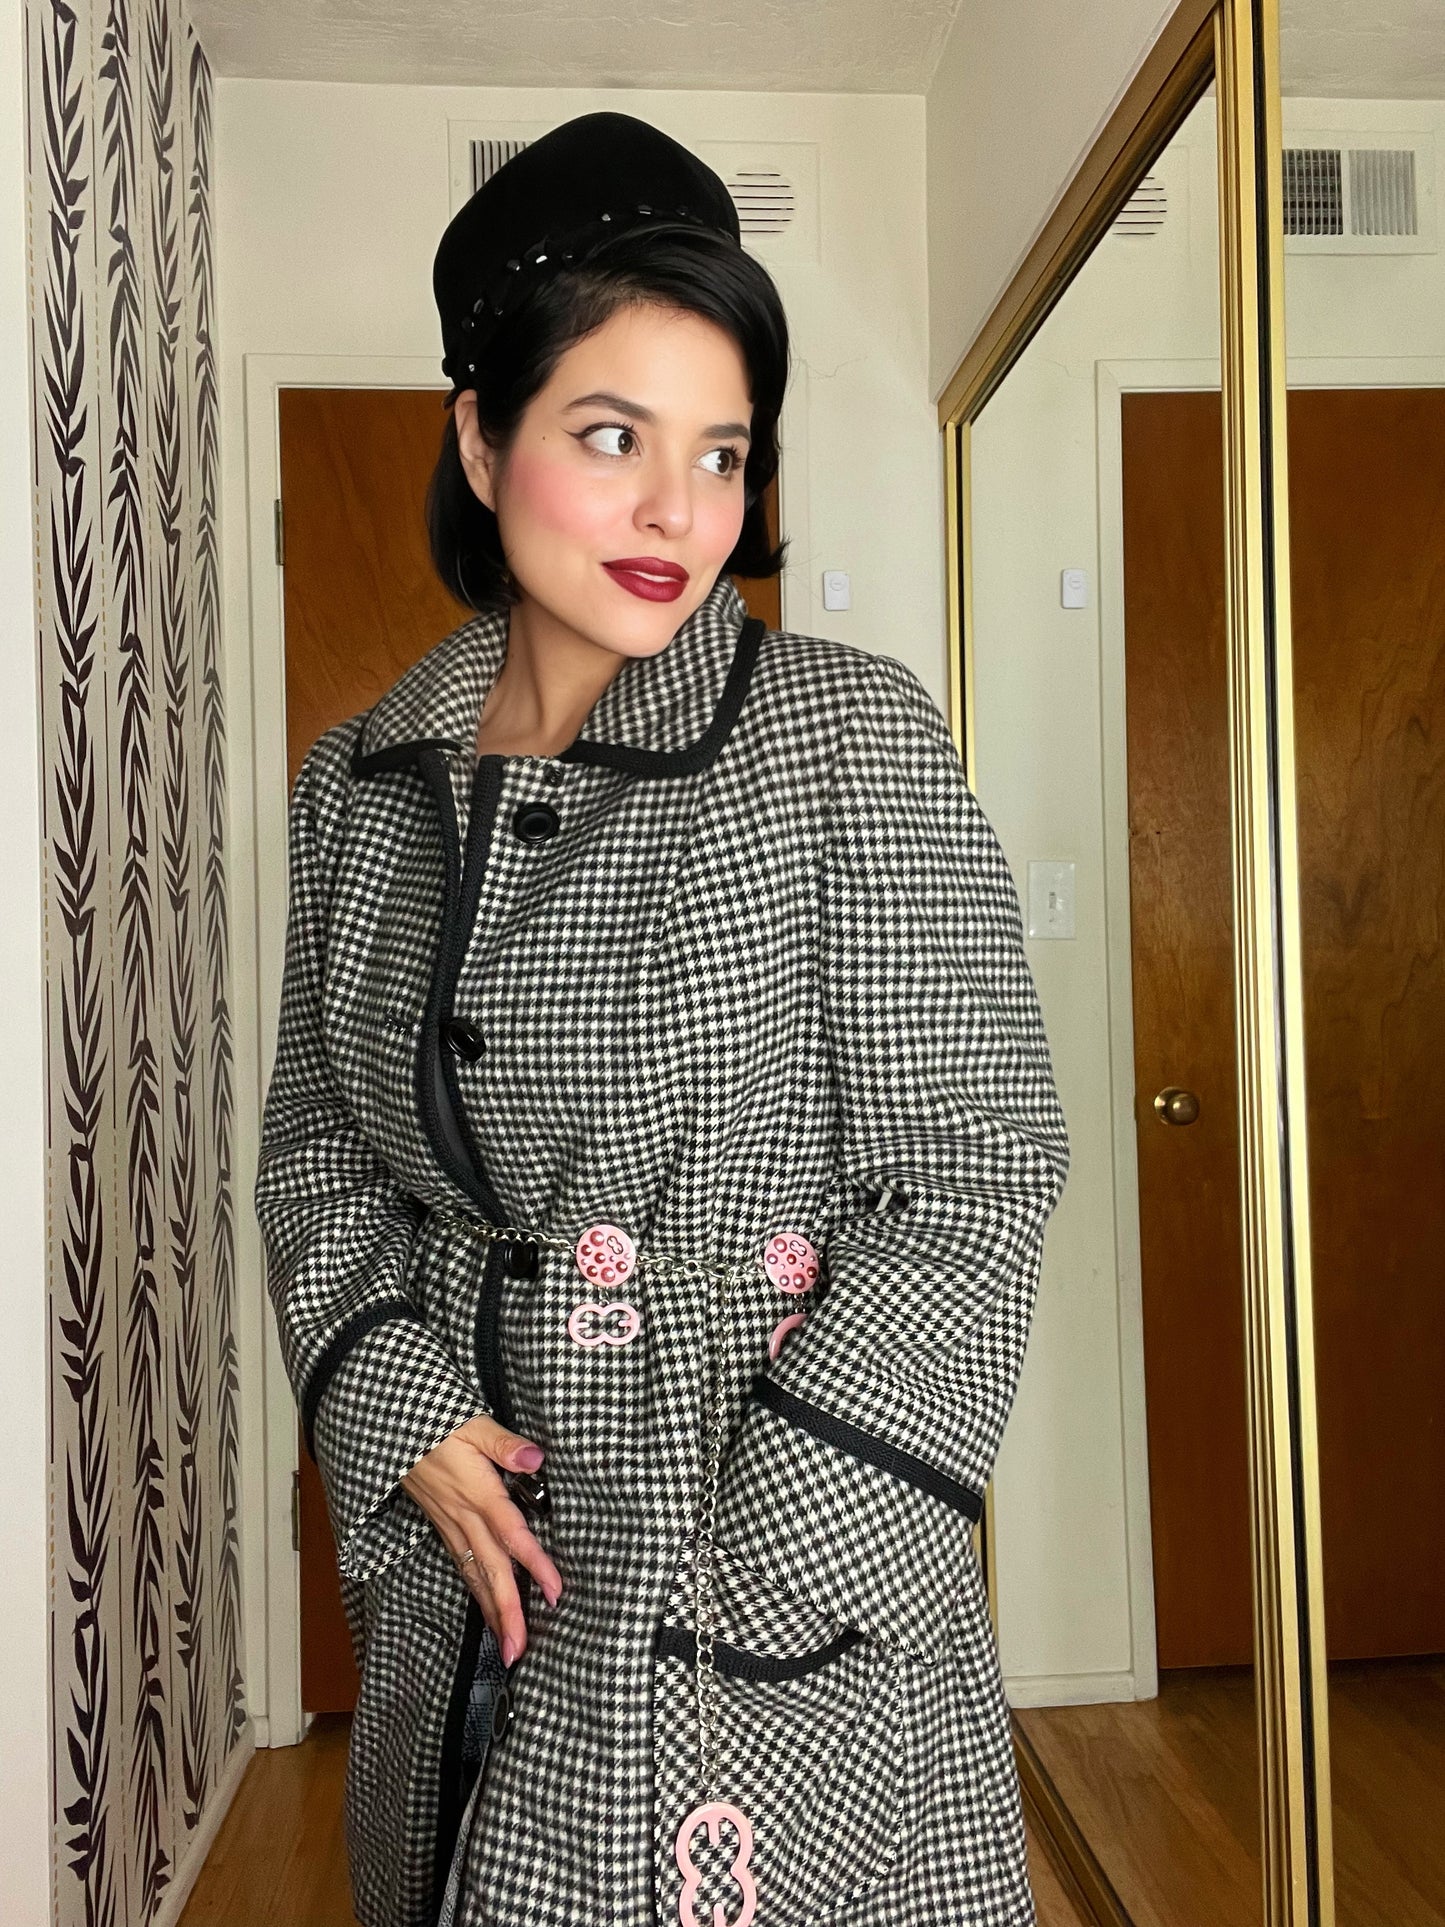 Vintage 50s 60s “Sears Fashions” Black and White Gingham Swing Style Coat with Rounded Collar Fits Most Sizes